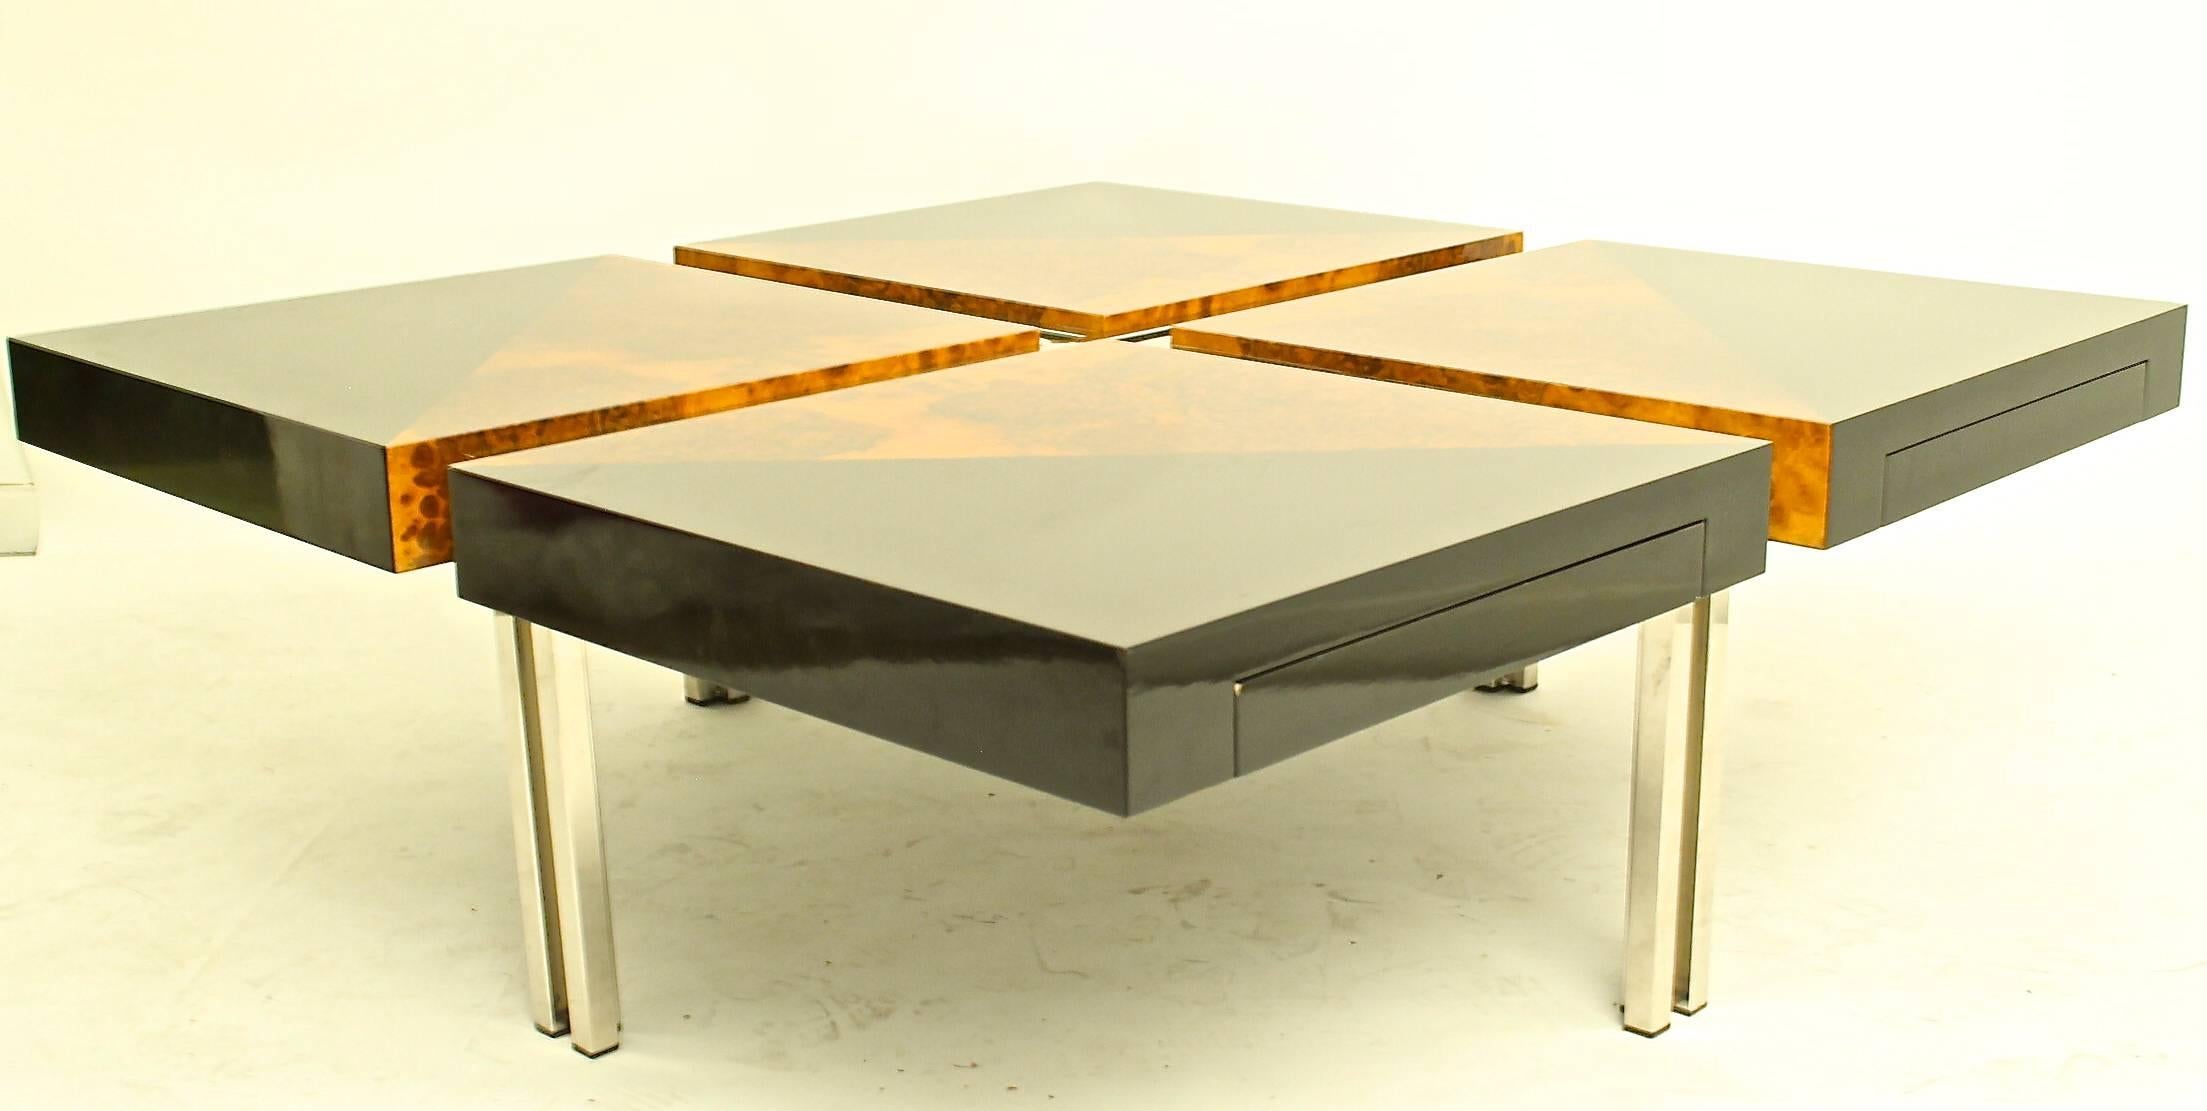 Stunning root and solid wood coffee table. The metal and wood base has two crossed diagonals on polished metal. the high-gloss lacquered wood base, presents two different colours resulting a very elegant composition. The table is in an excellent